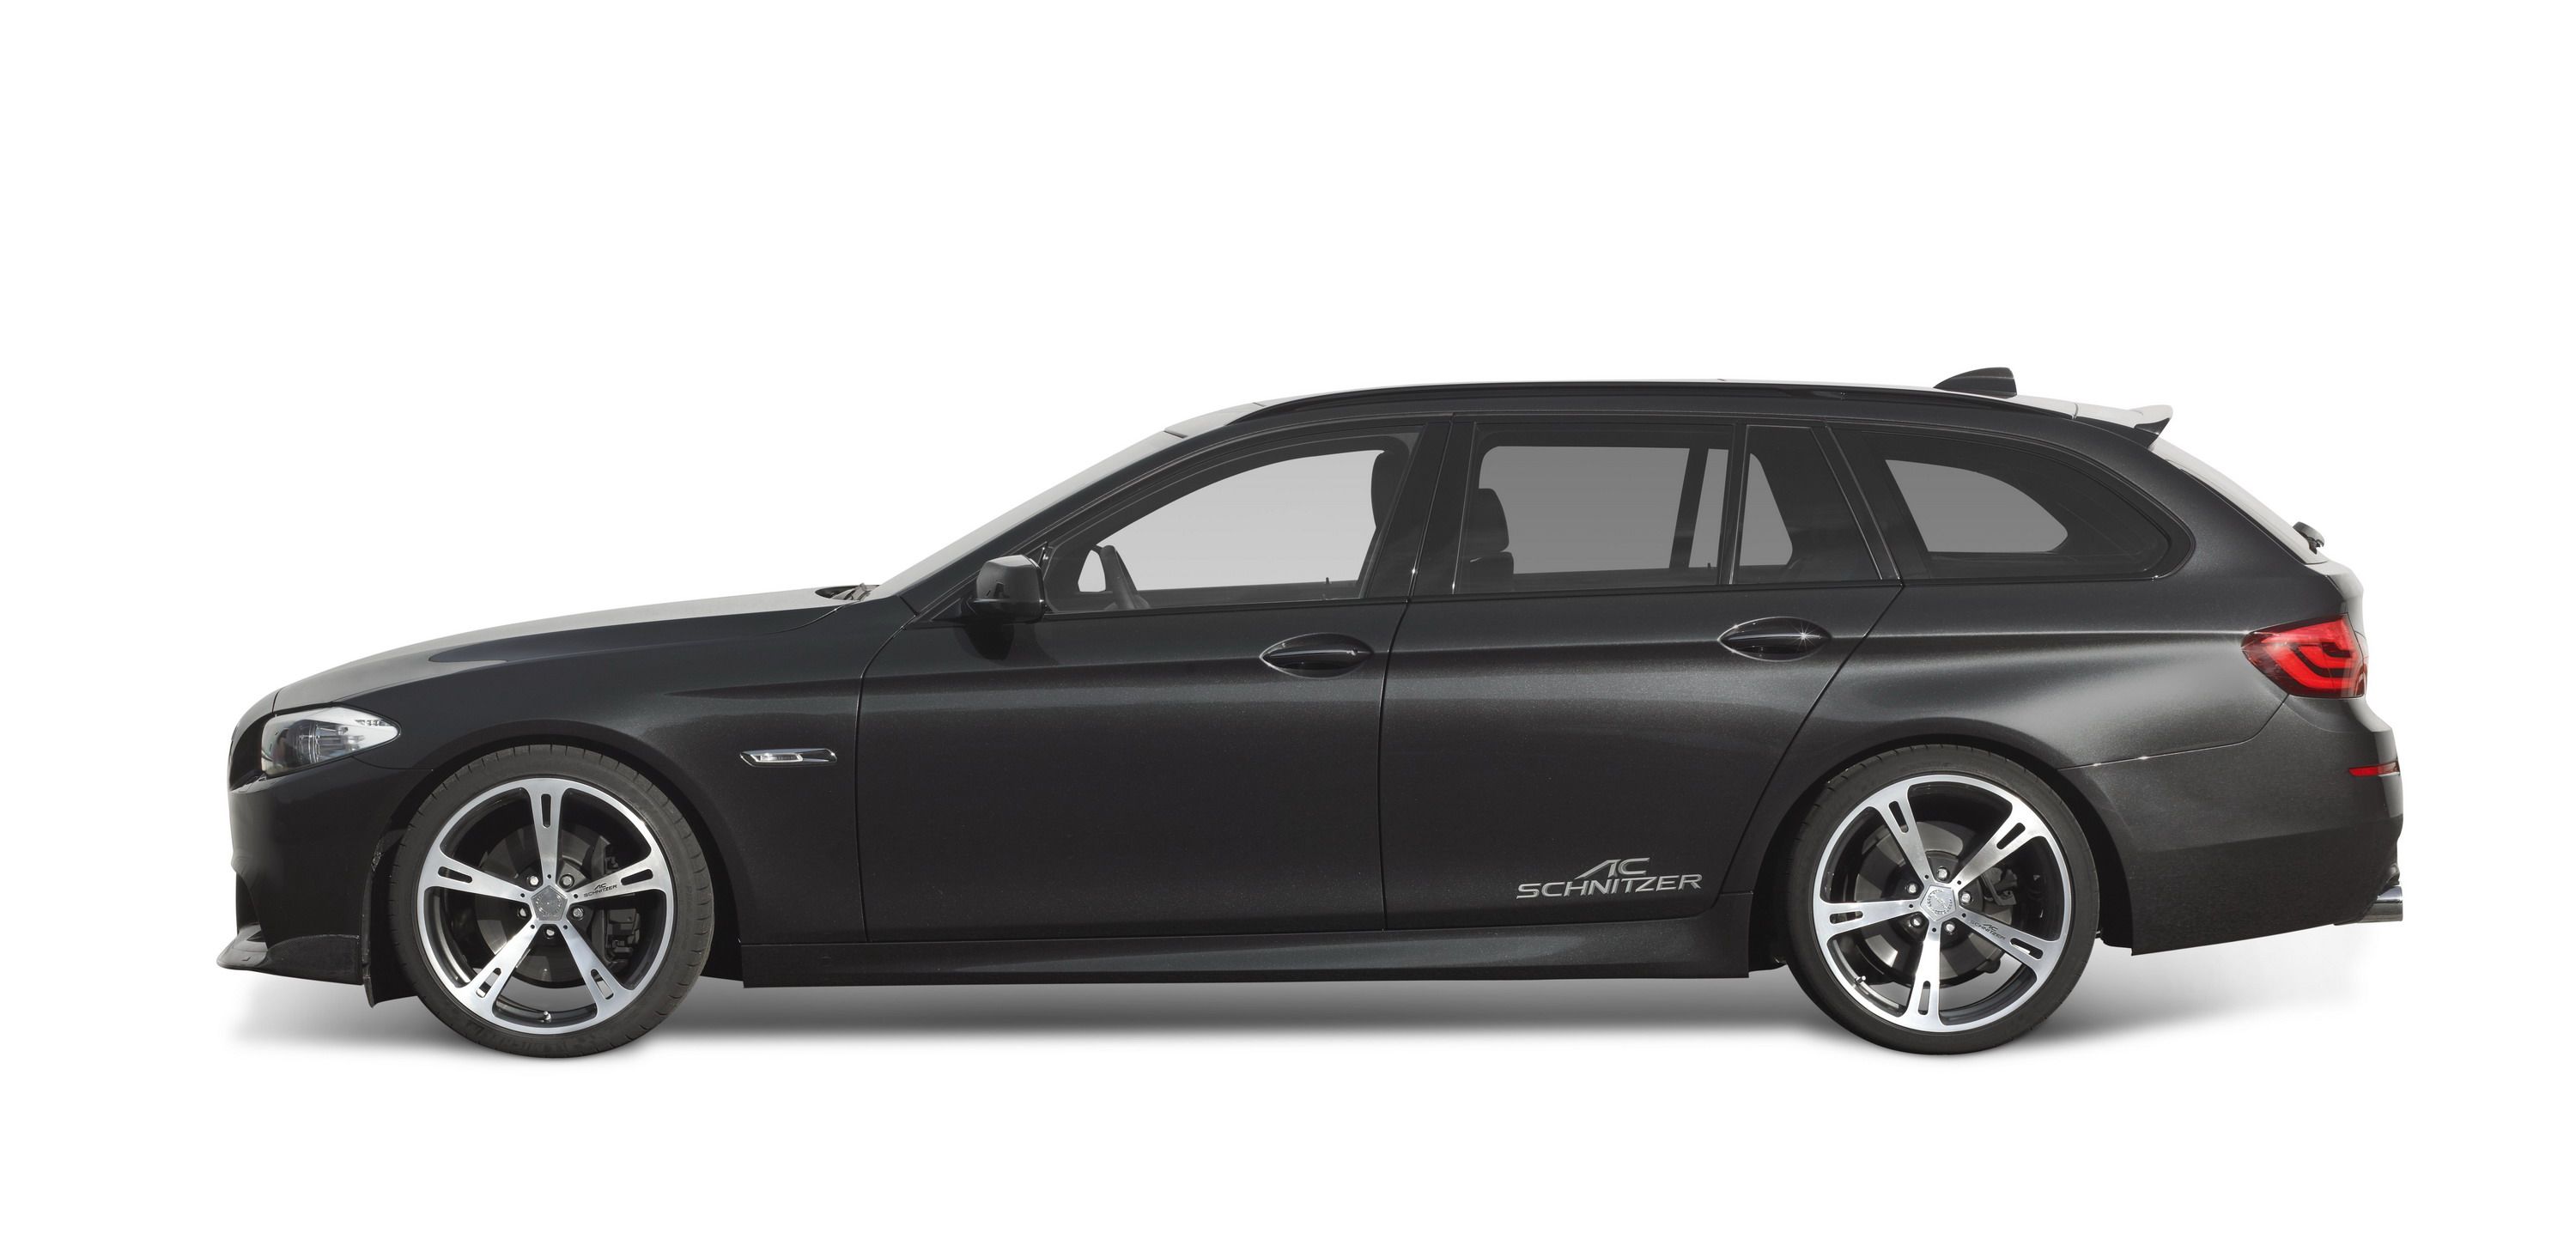 2013 BMW 5 Series Touring by AC Schnitzer